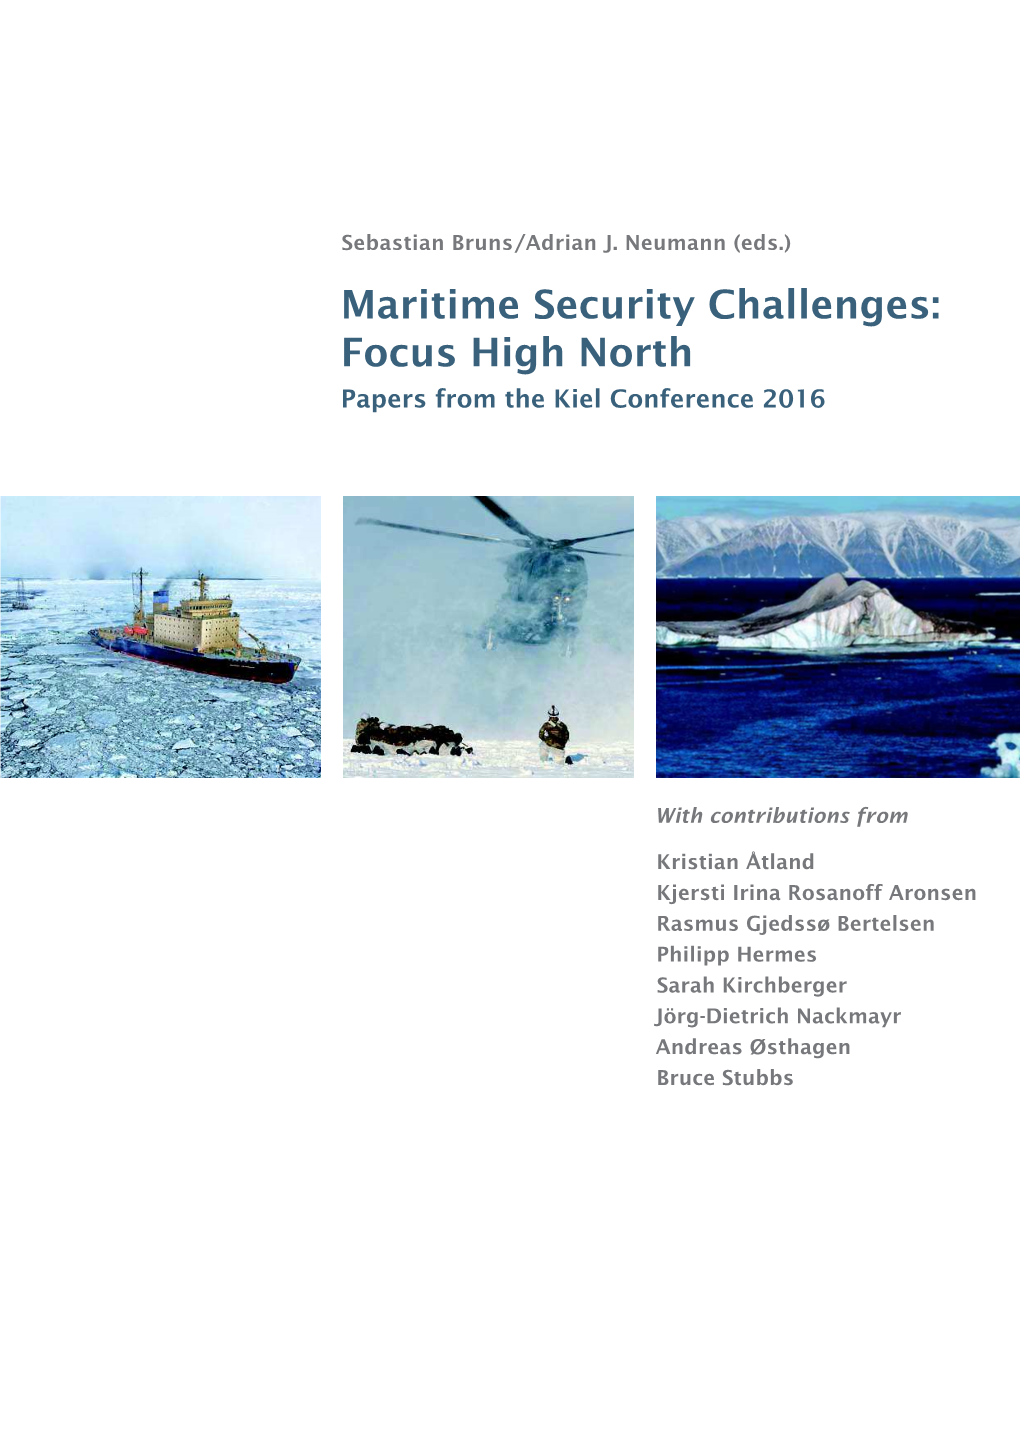 Maritime Security Challenges: Focus High North Papers from the Kiel Conference 2016